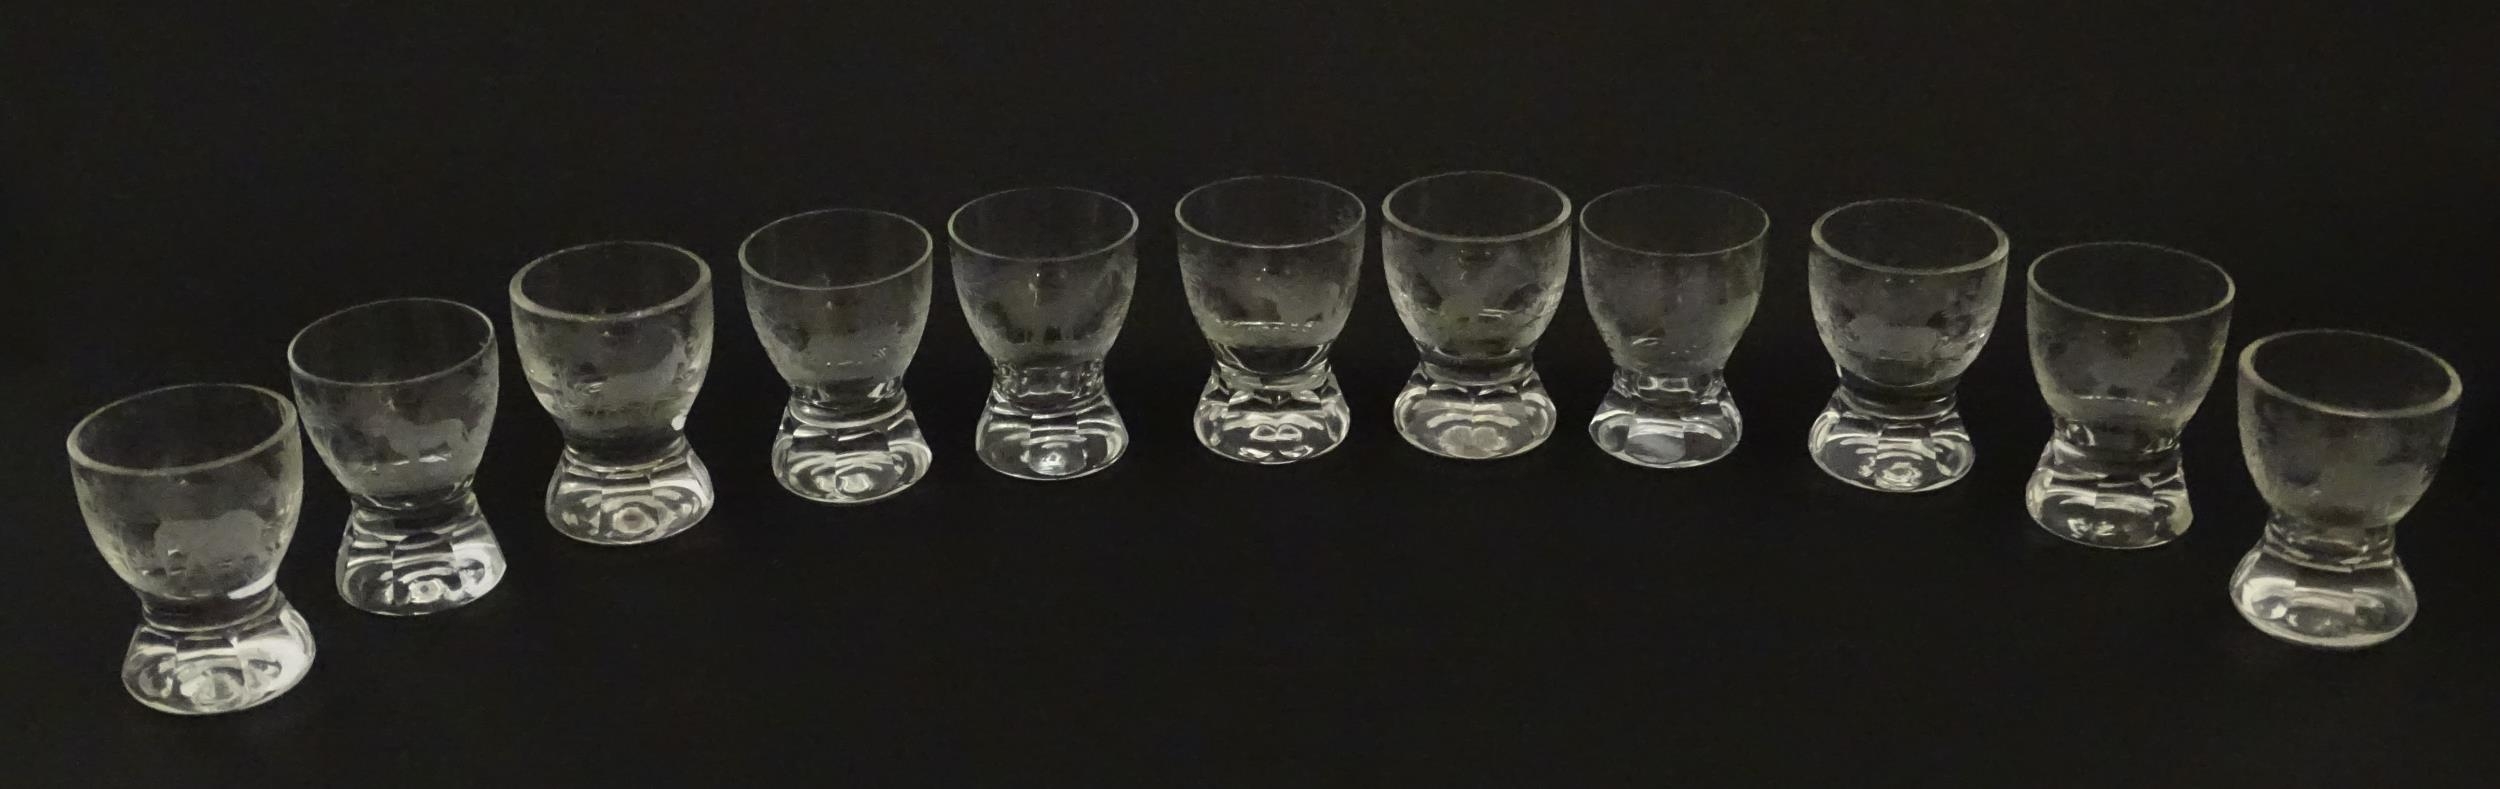 Rowland Ward sherry / liquor glasses with engraved Safari animal detail. Unsigned. Largest approx. - Image 3 of 26